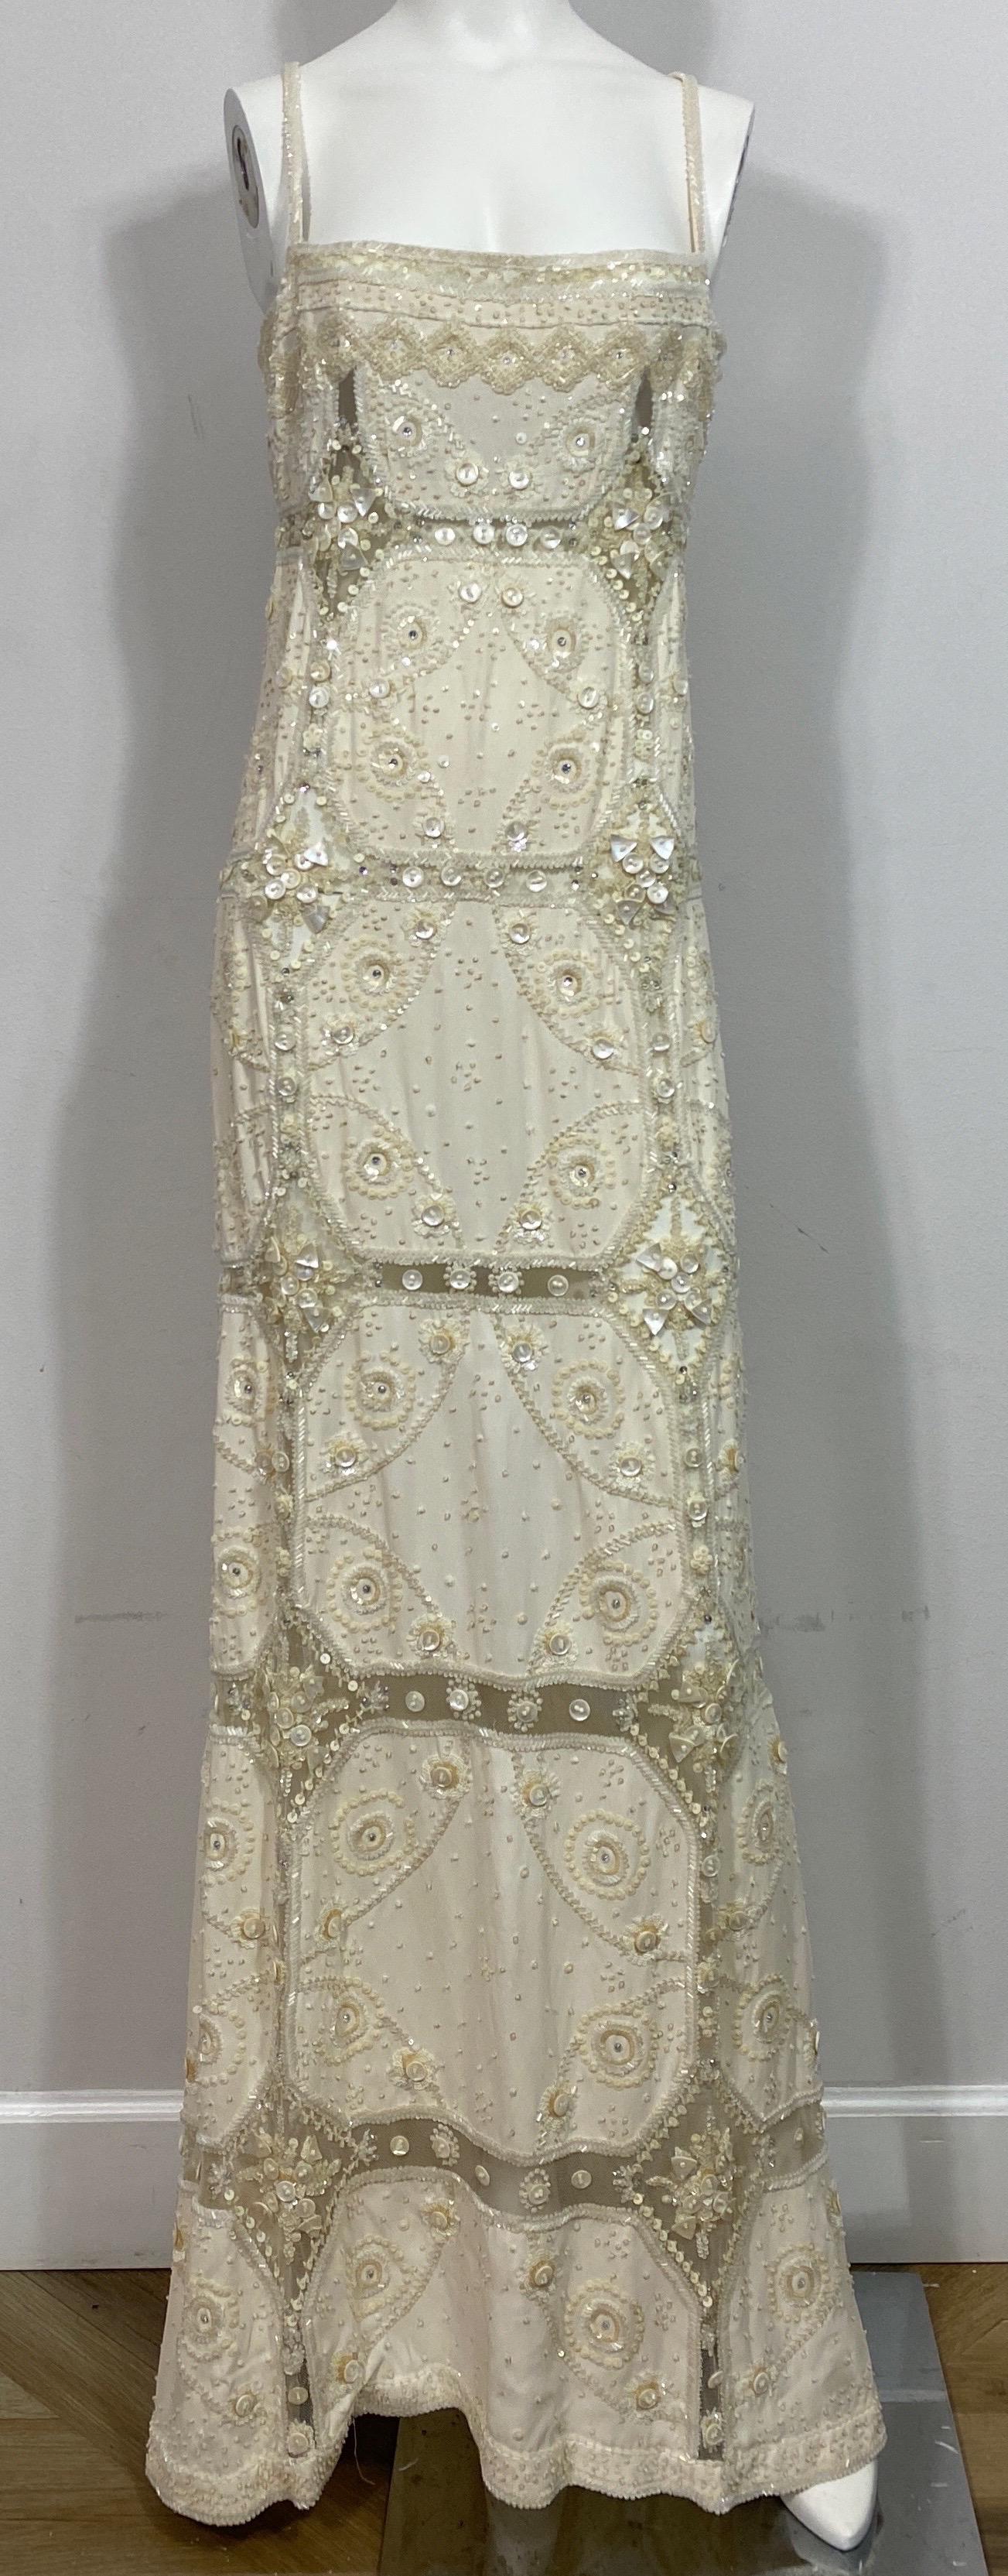 Valentino Ivory Heavily Embellished Beaded Silk and Mesh Gown - Size 12  This Valentino masterpiece will turn heads as the gown is heavily beaded throughout the silk and mesh areas in sequins of all different sizes, bugle beads, mabe pearl pieces in